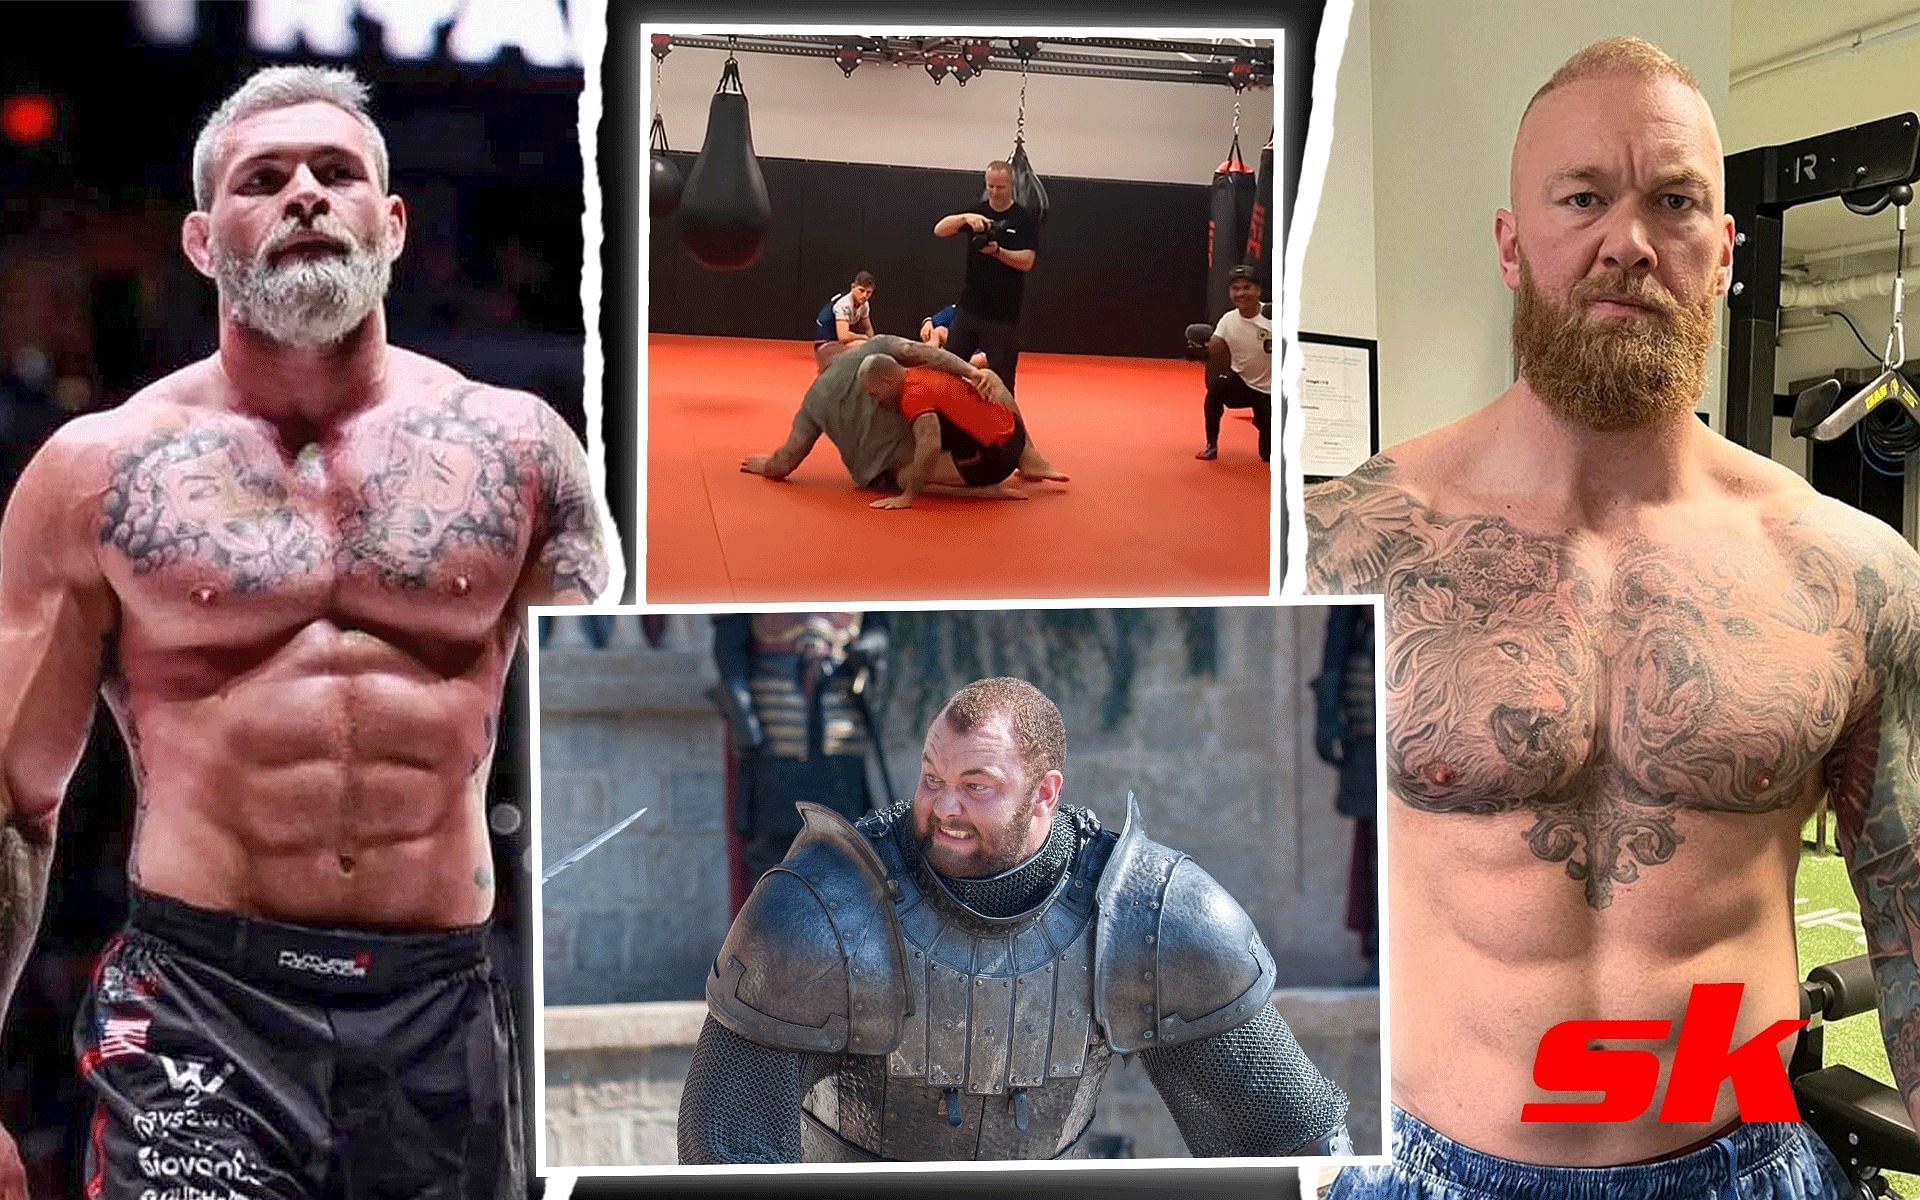 Gordon Ryan (left) and Hafthor Bjornsson (right) (Image credits Getty Images, @consequence on Twitter, and Hafthor Bjornsson on YouTube)